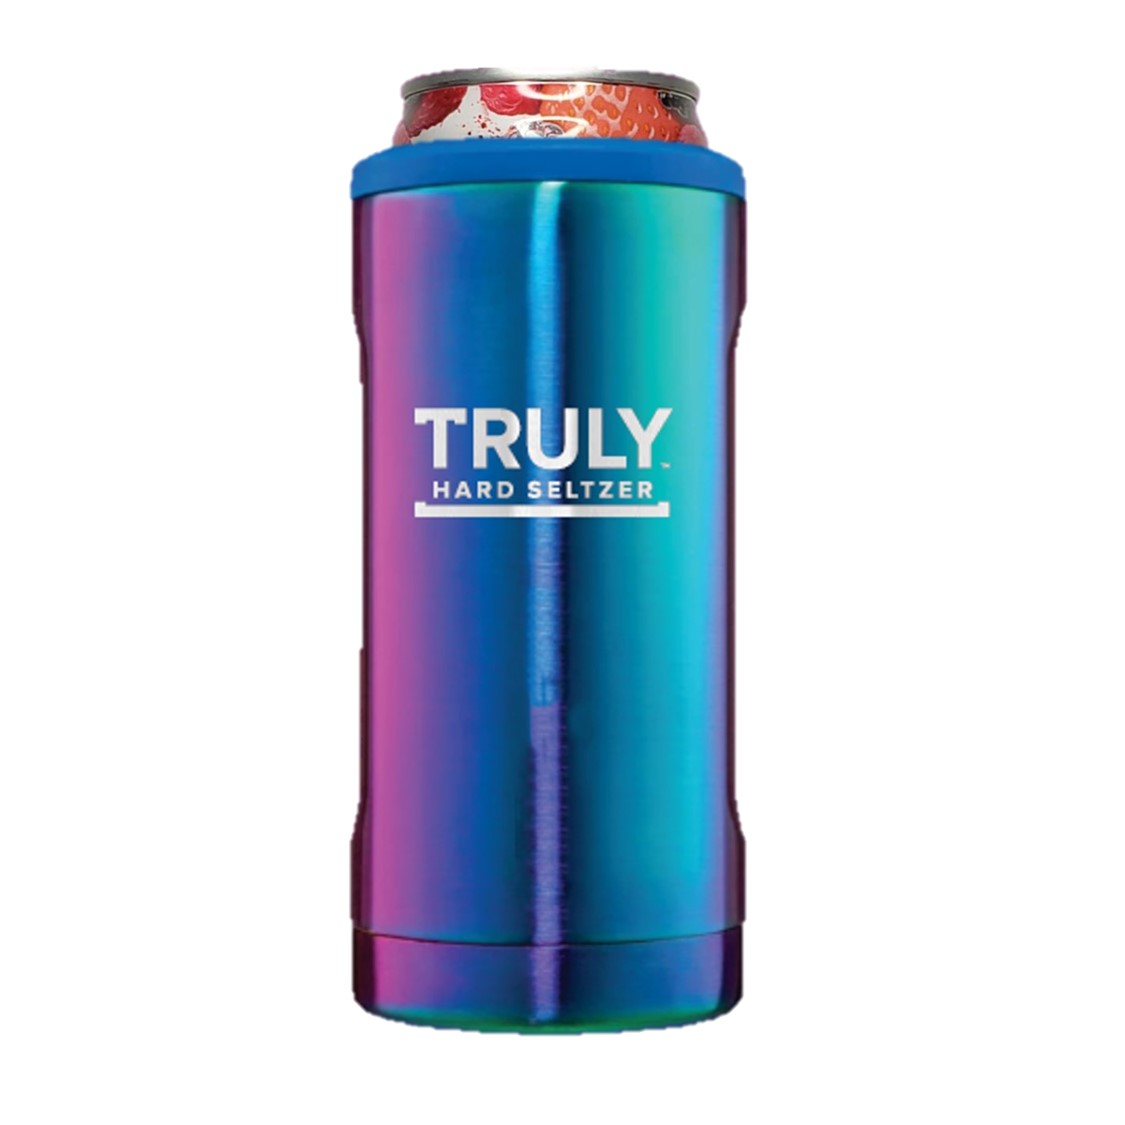 Truly Flavor Shop | Truly Hard Seltzer